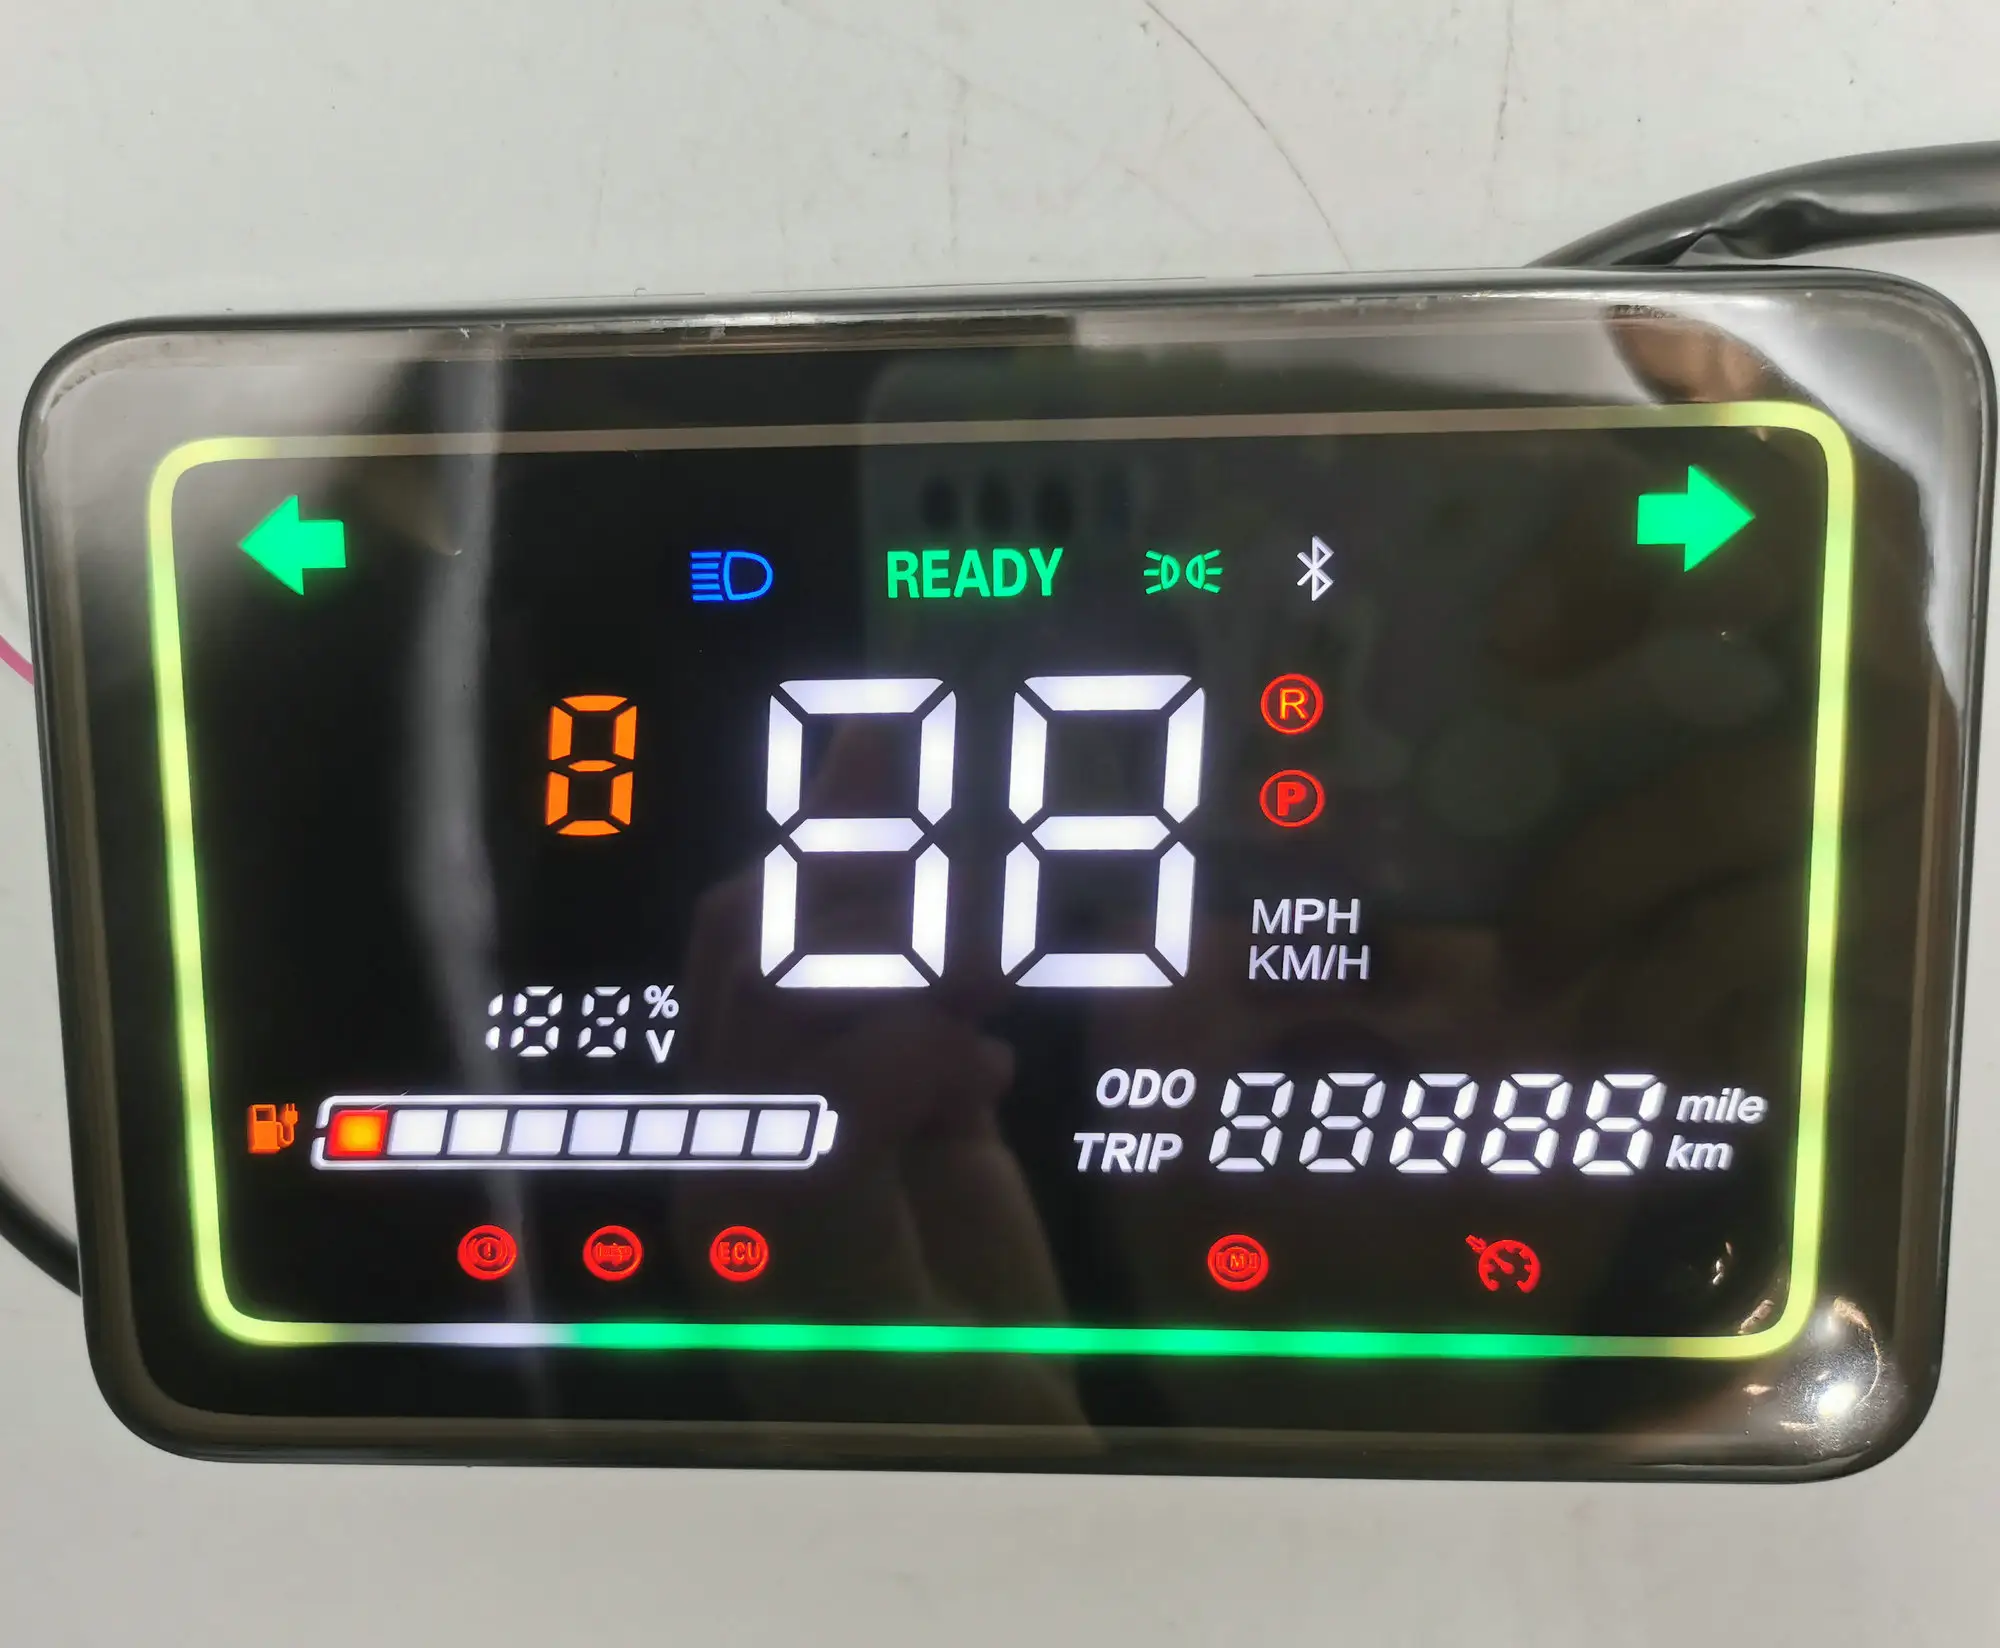 Colored Large Screen LCD DISPLAY FOR Modified Electric SCOOTER with Lithium/LEAD ACID Battery EBIKe Zuma Tortoise King DASHBOARD